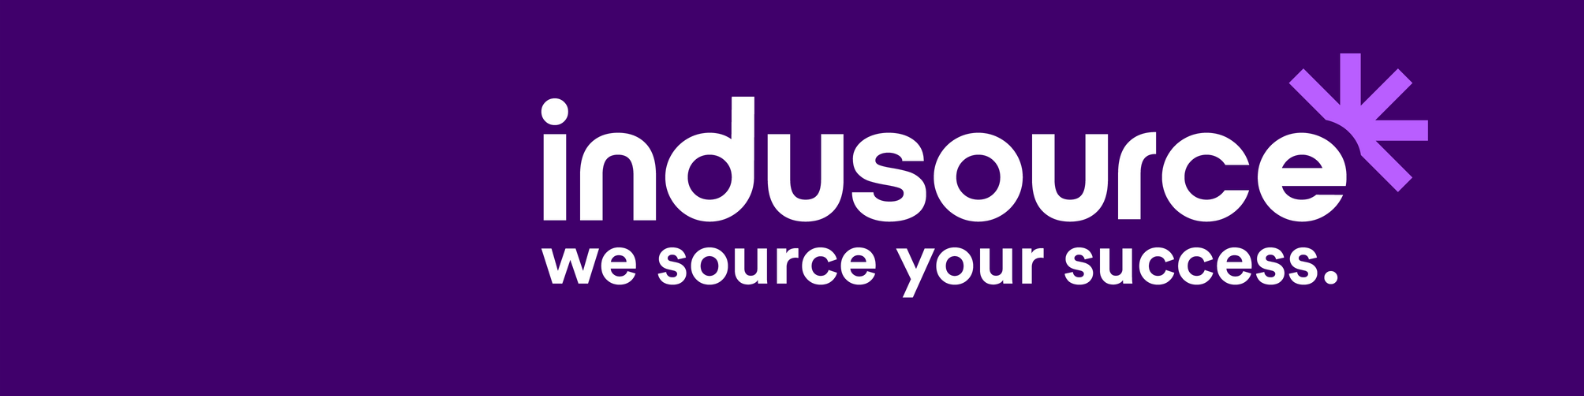 Indusource logo wit paars banner